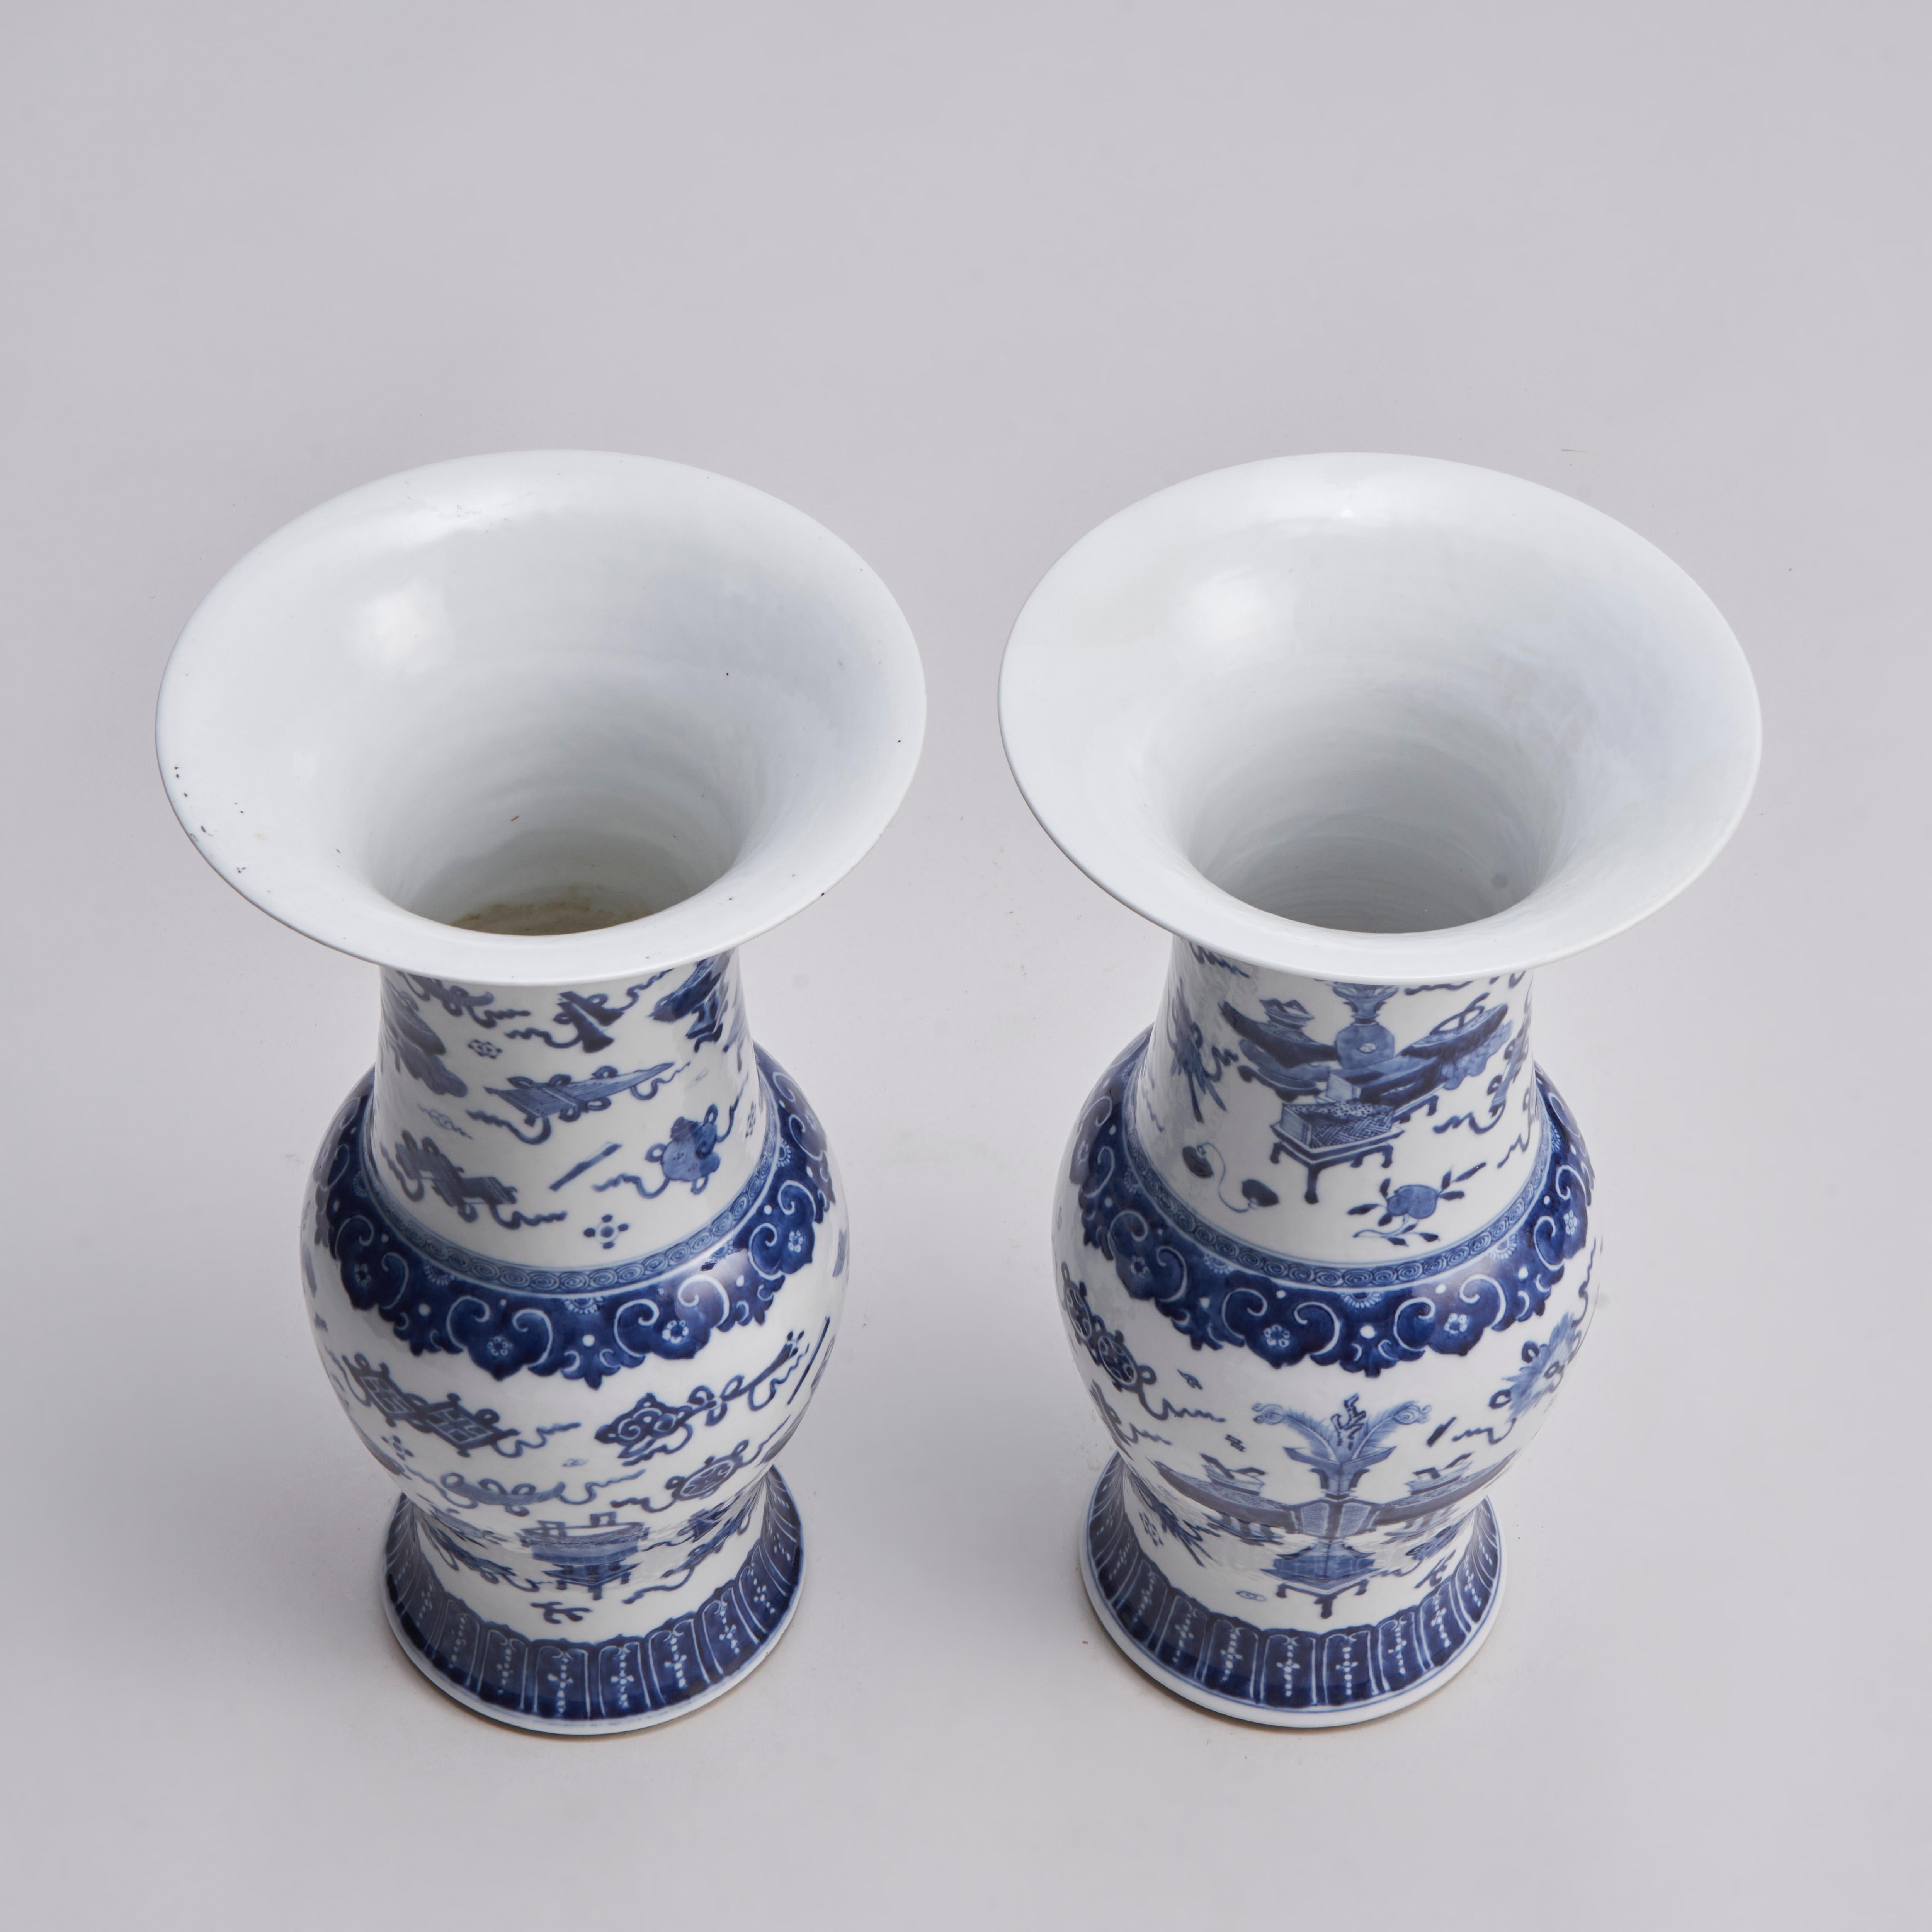 From our collection of antique Chinese porcelain, this pair of 19th century Chinese blue and white Phoenix tail Yen Yen vases (Fengweizun) with fine decoration of precious arcaic bronzes and the auspicious eight treasures on a crisp white